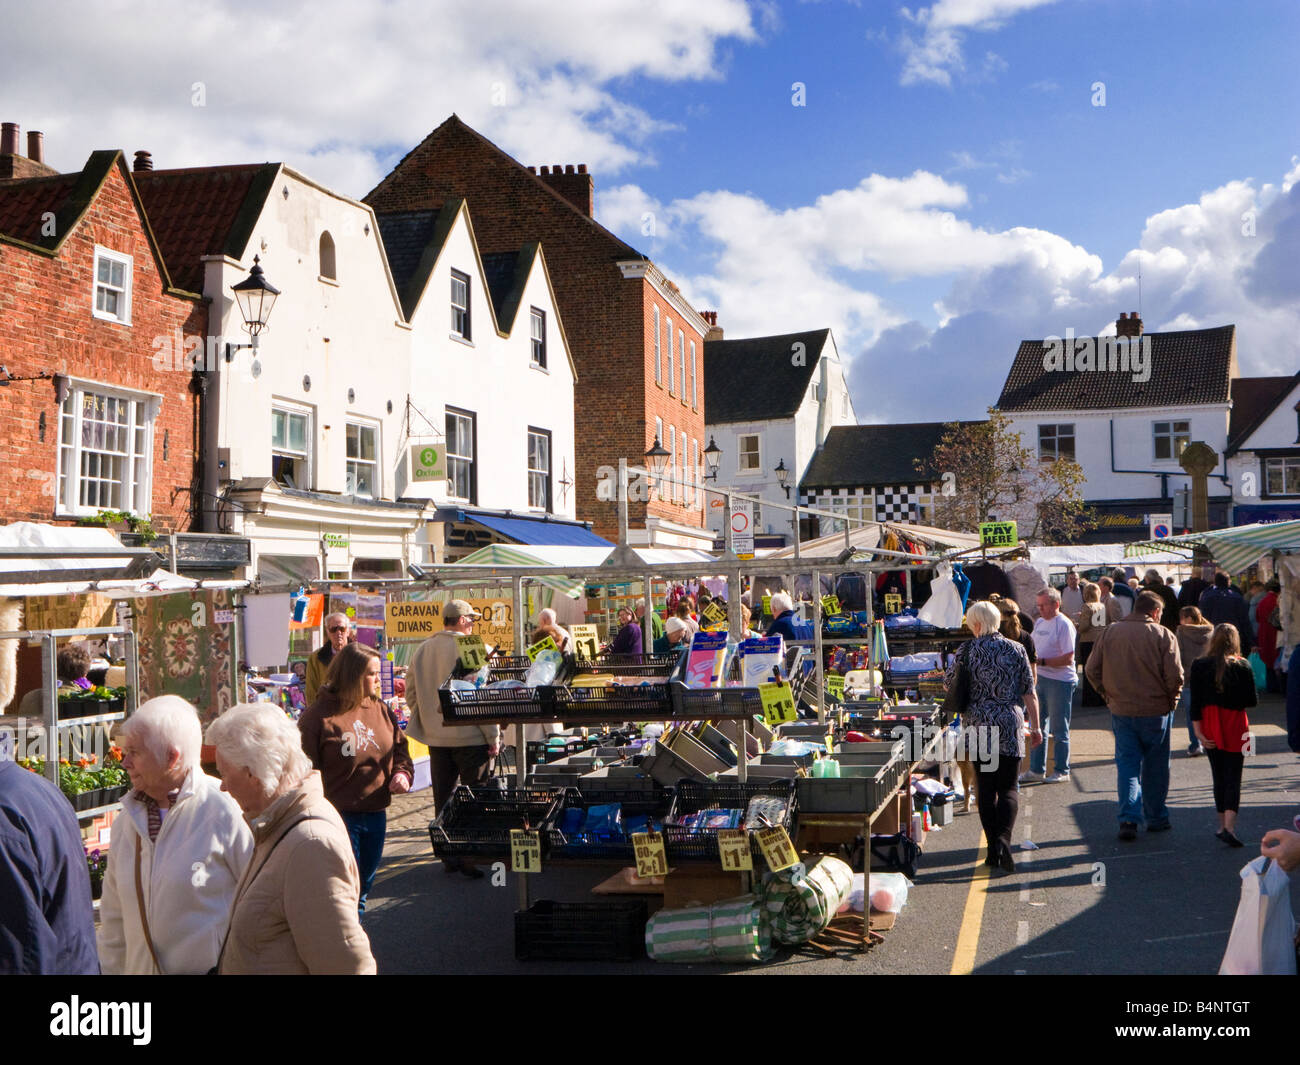 The crowded market in the Market Place at Knaresborough, North Yorkshire, England, UK Stock Photo